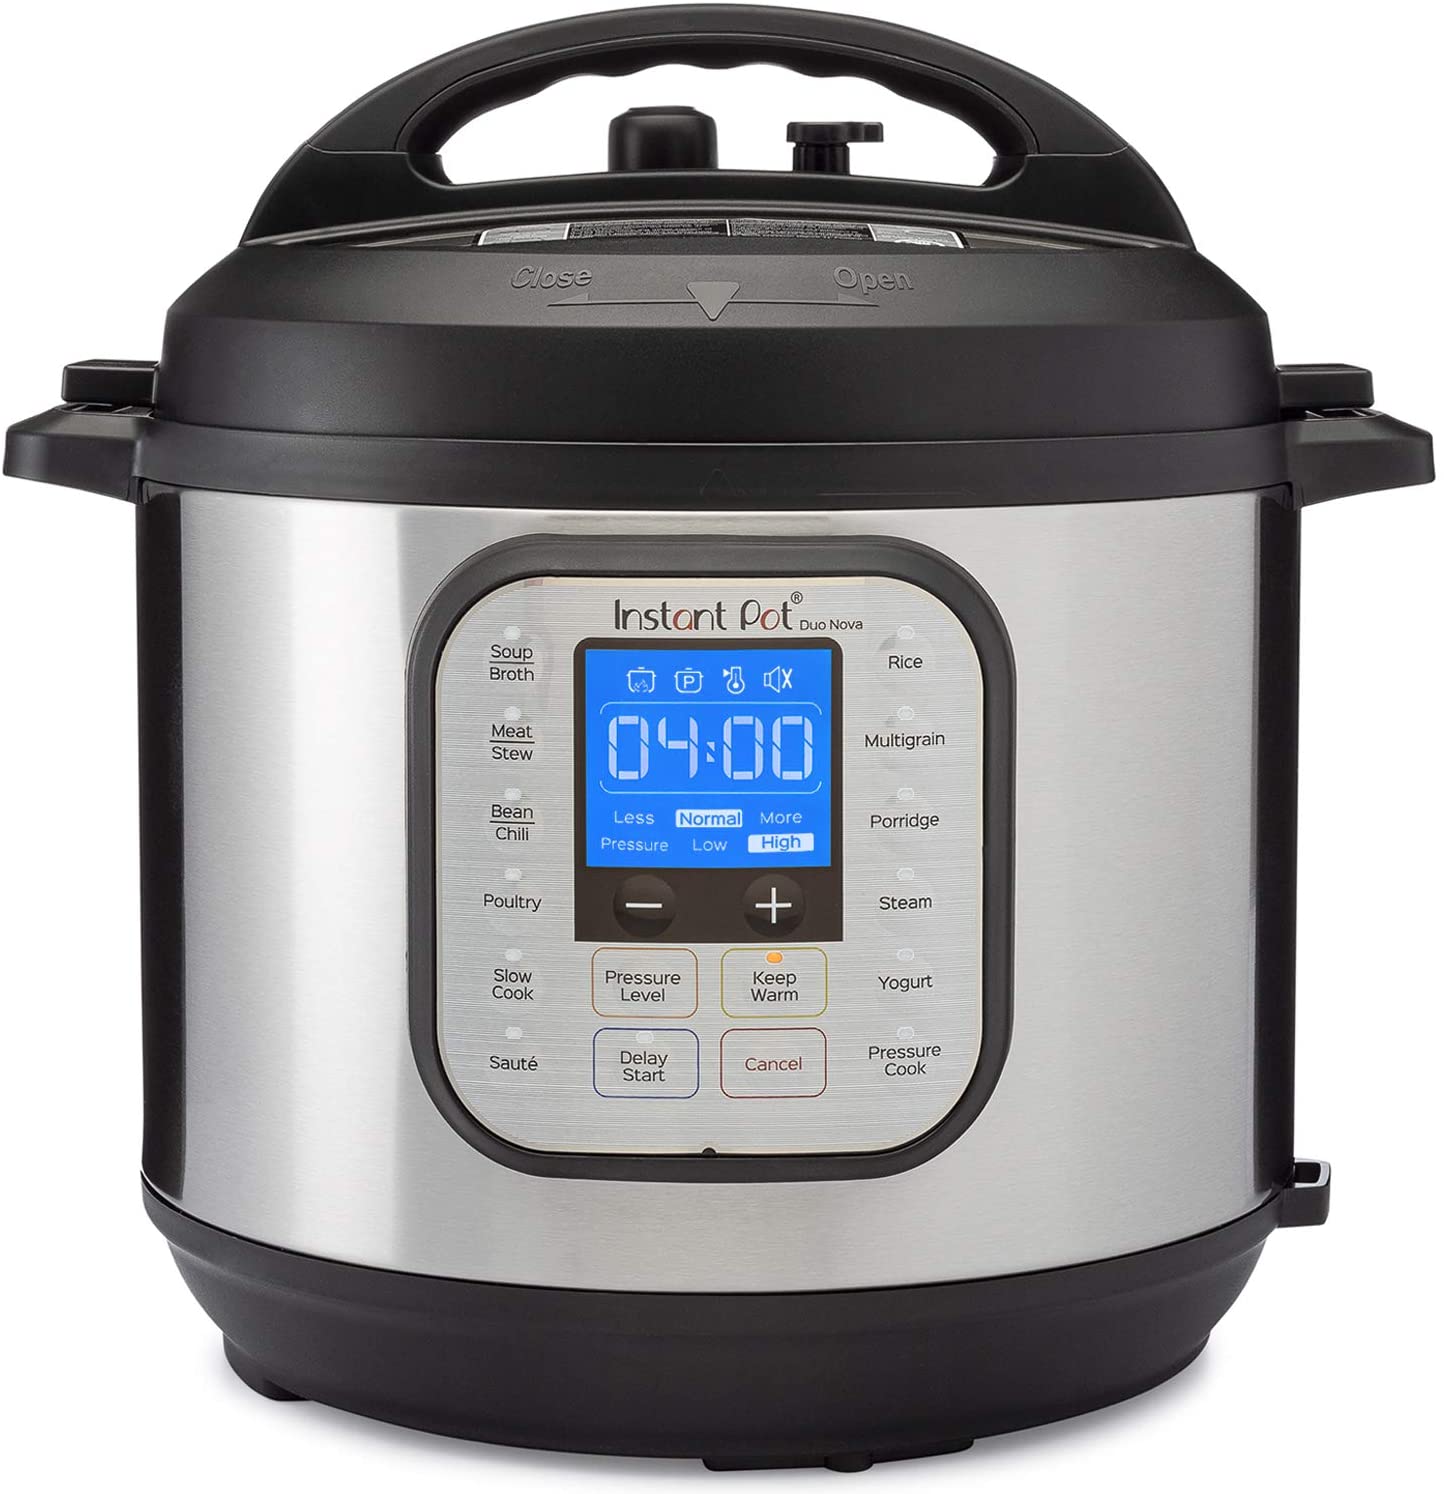 The Best Electric Pressure Cooker For Families | June 2022